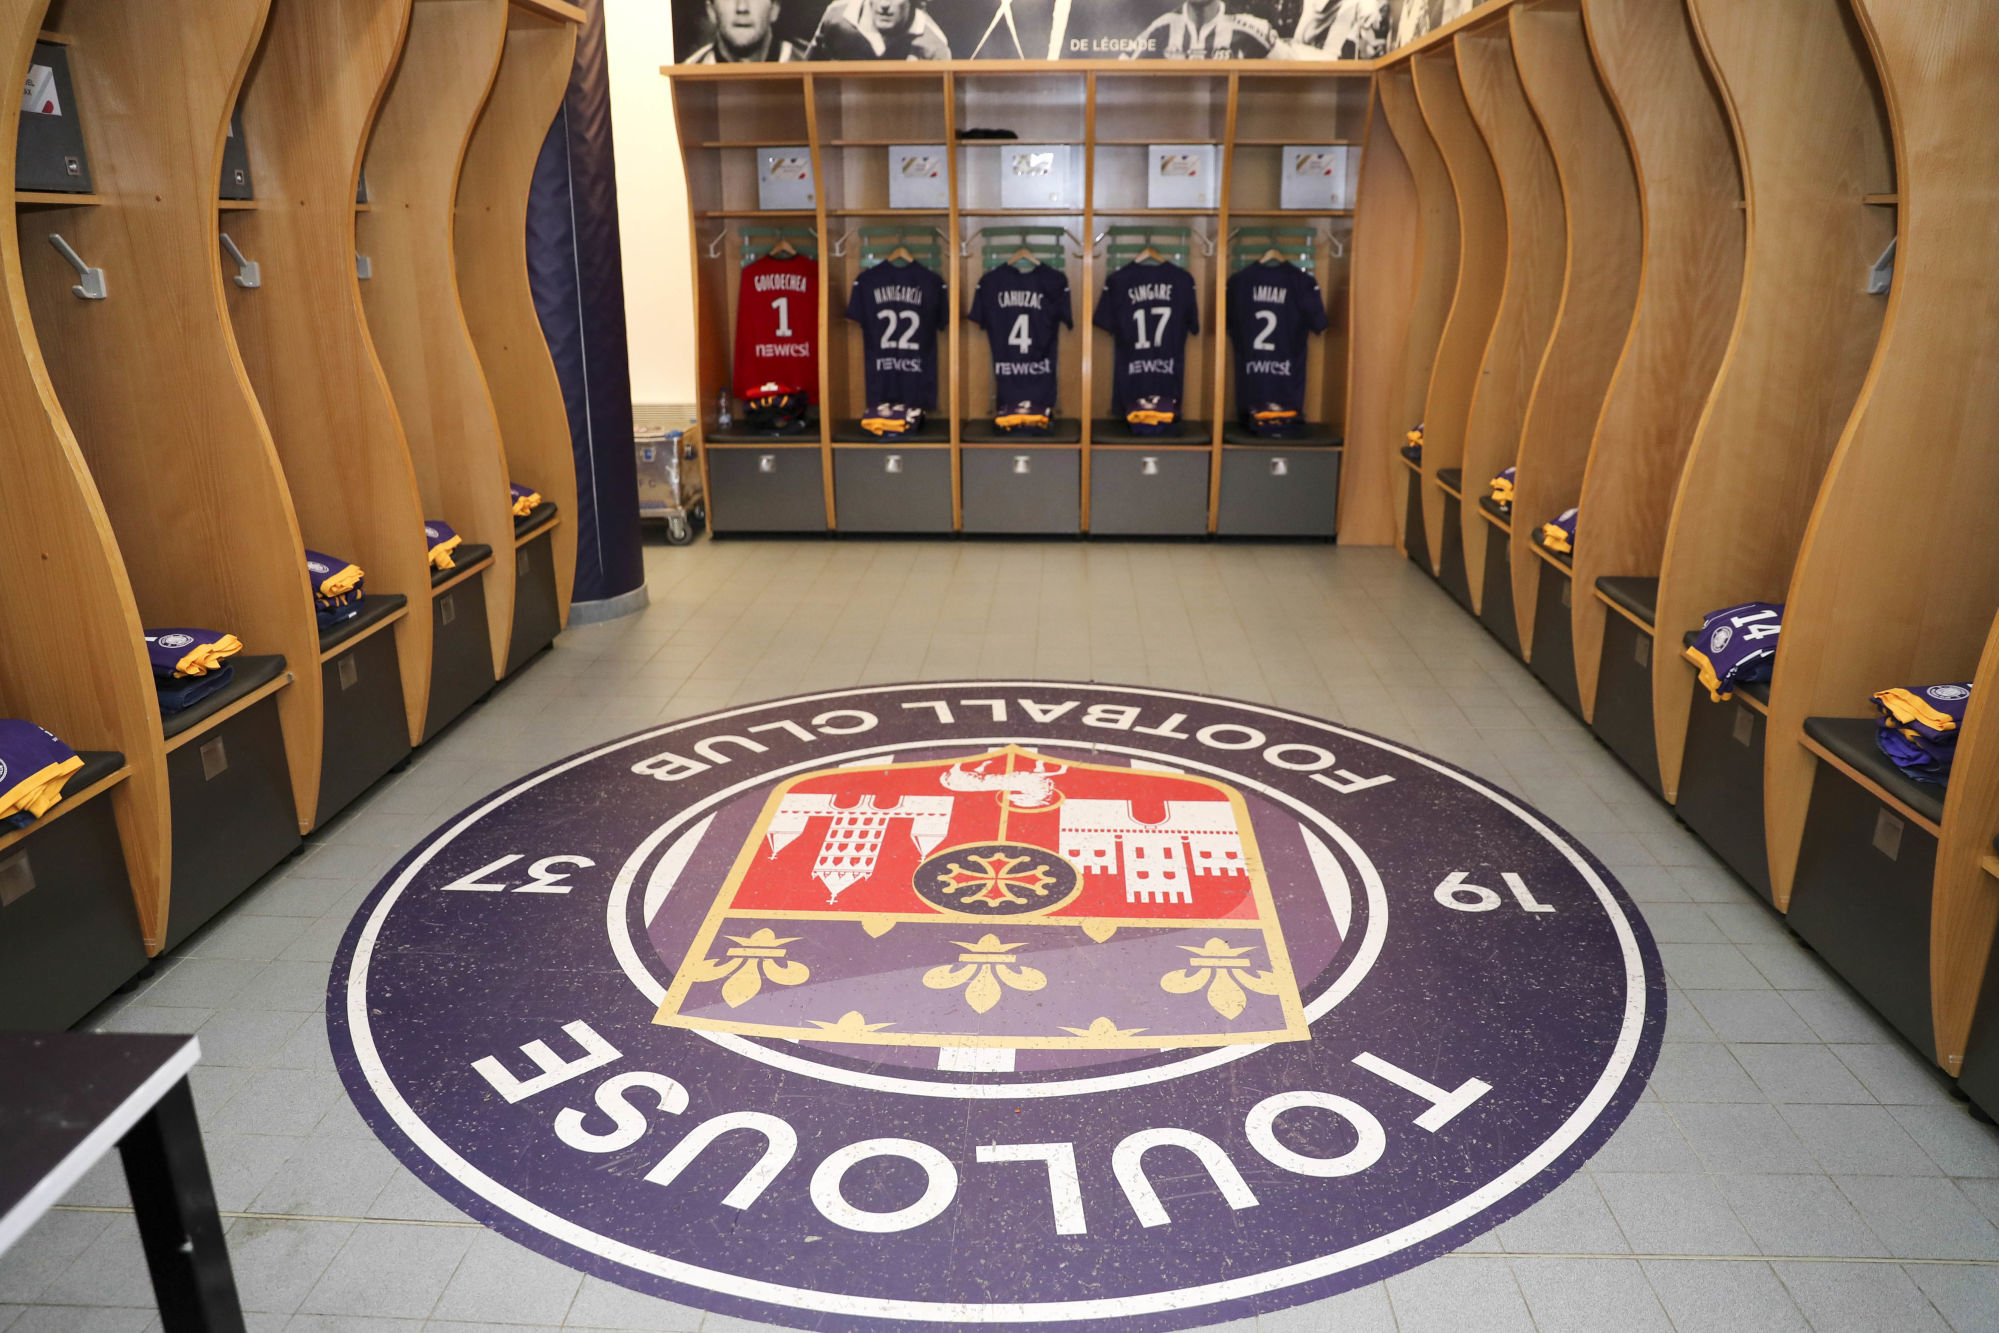 Jerseys of players are seen inside the Toulouse dressing room prior to the match during the Ligue 1 match between Toulouse and Strasbourg at Stadium Municipal on January 13, 2019 in Toulouse, France. (Photo by Manuel Blondeau/Icon Sport)